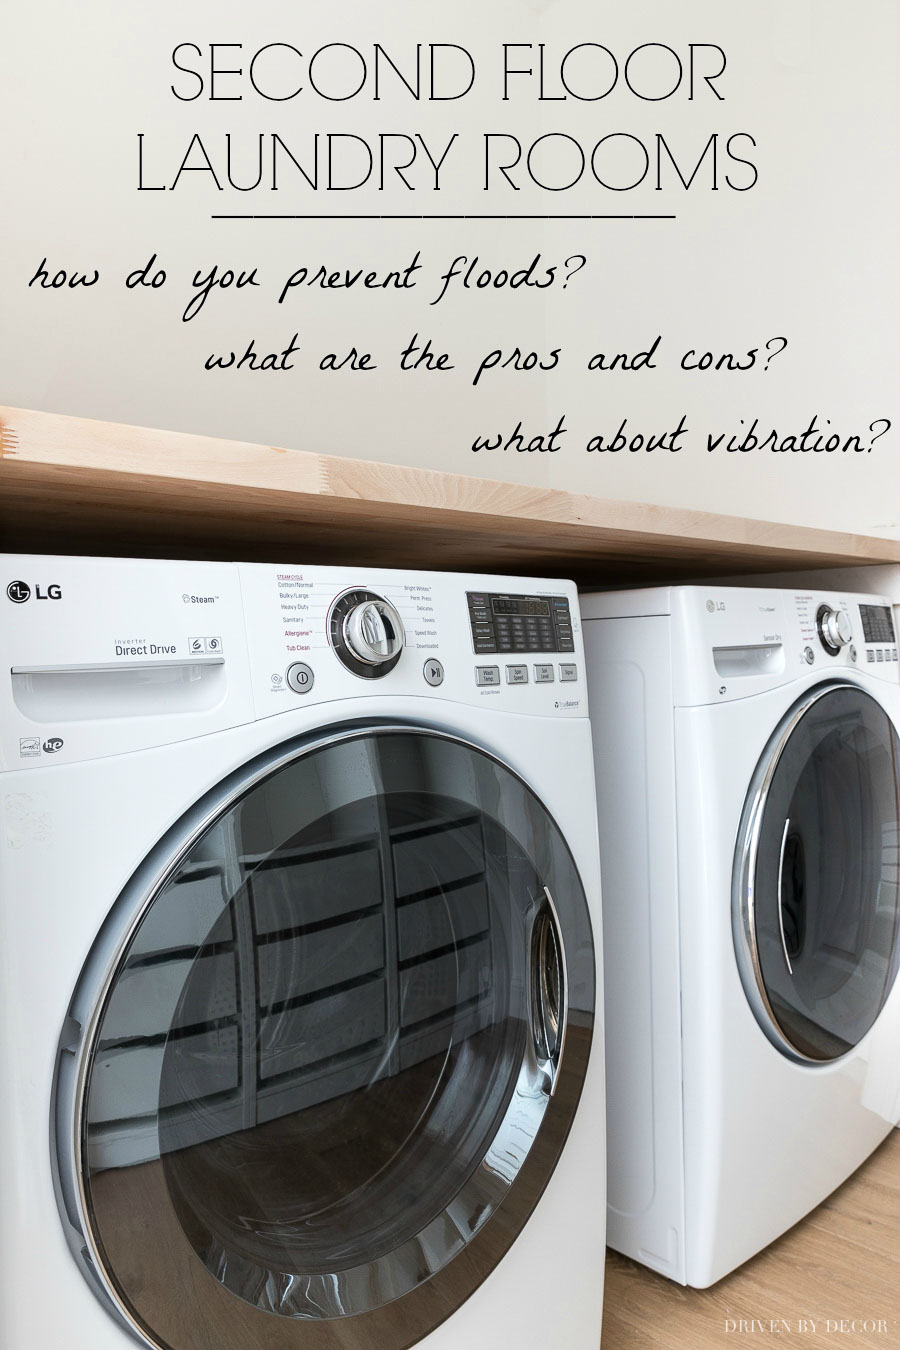 Second floor laundry rooms: Everything you need to know about floods, vibration, and more!